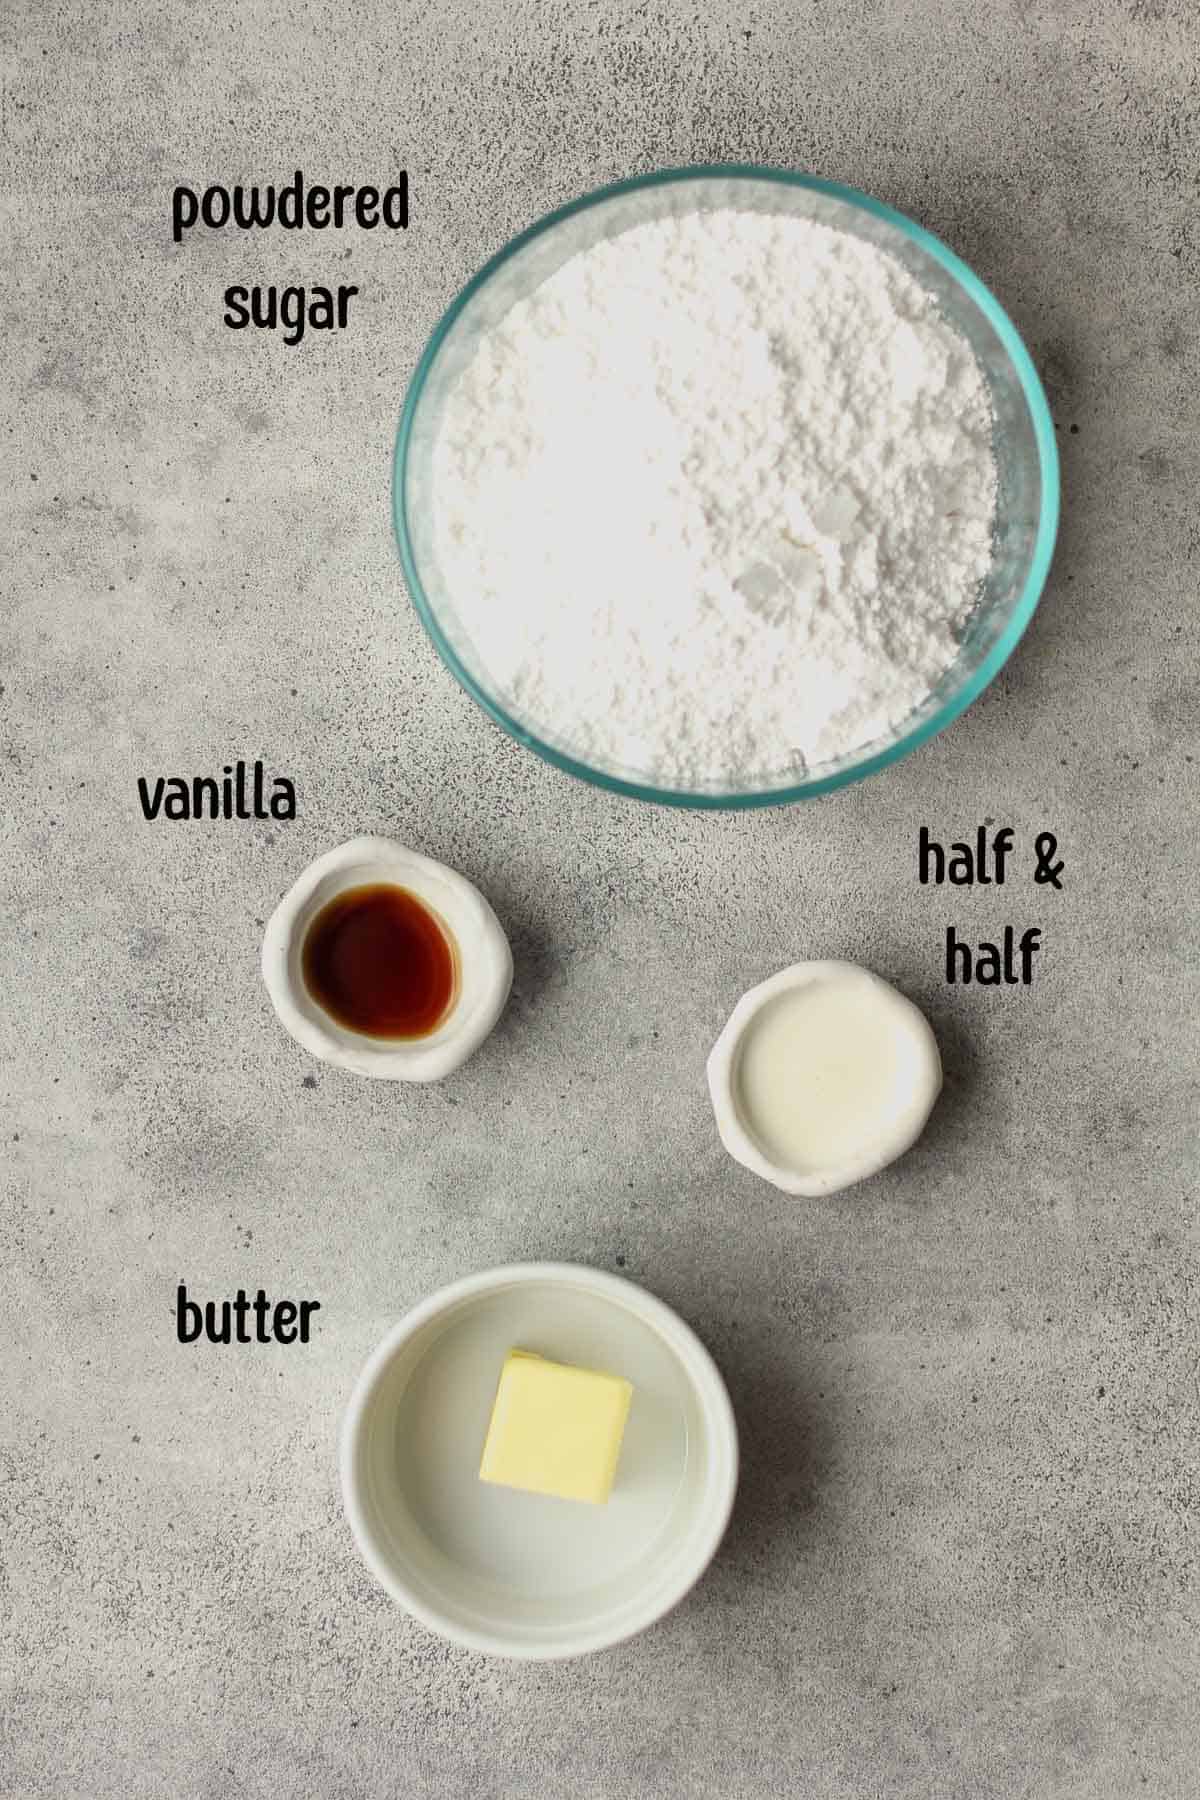 Ingredients for the powdered sugar frosting.